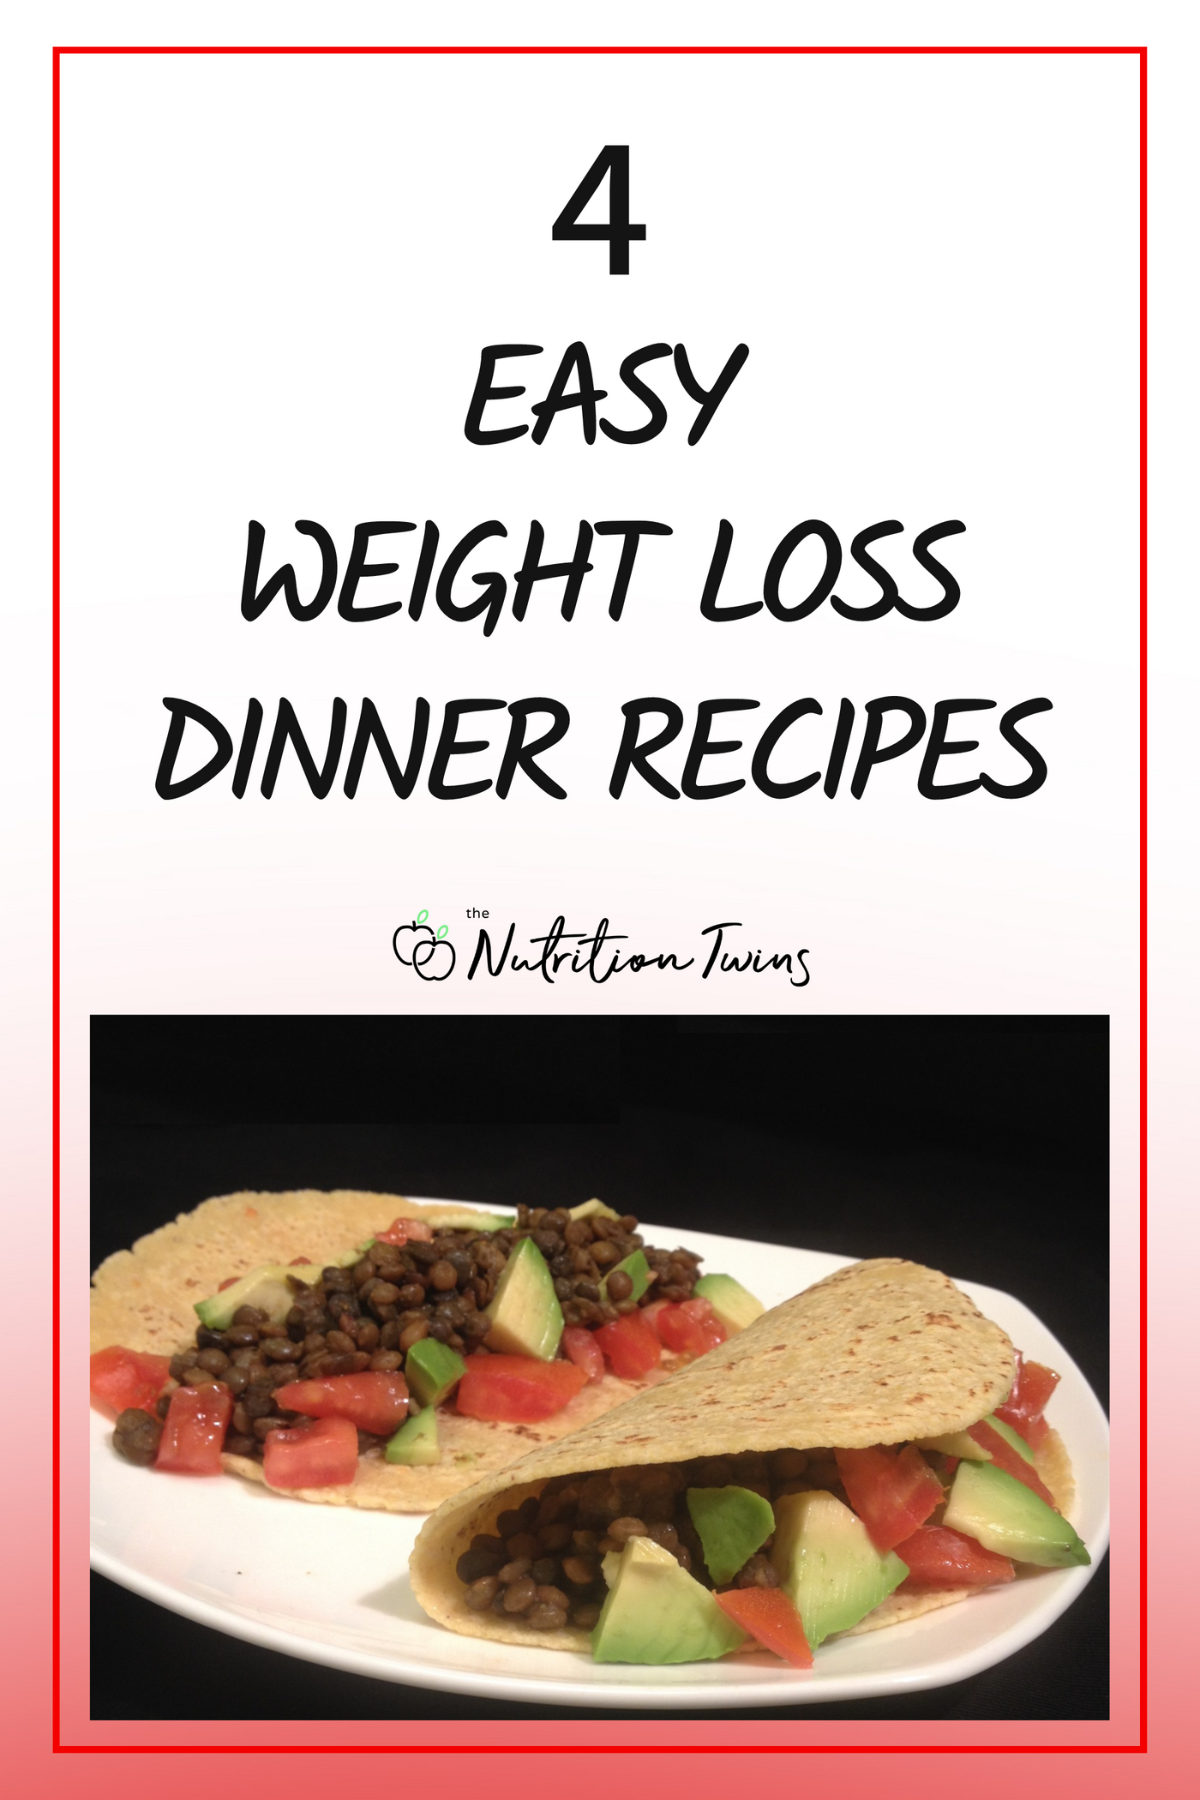 4 Easy Weight Loss Dinner Recipes with Lentil Tacos on plate